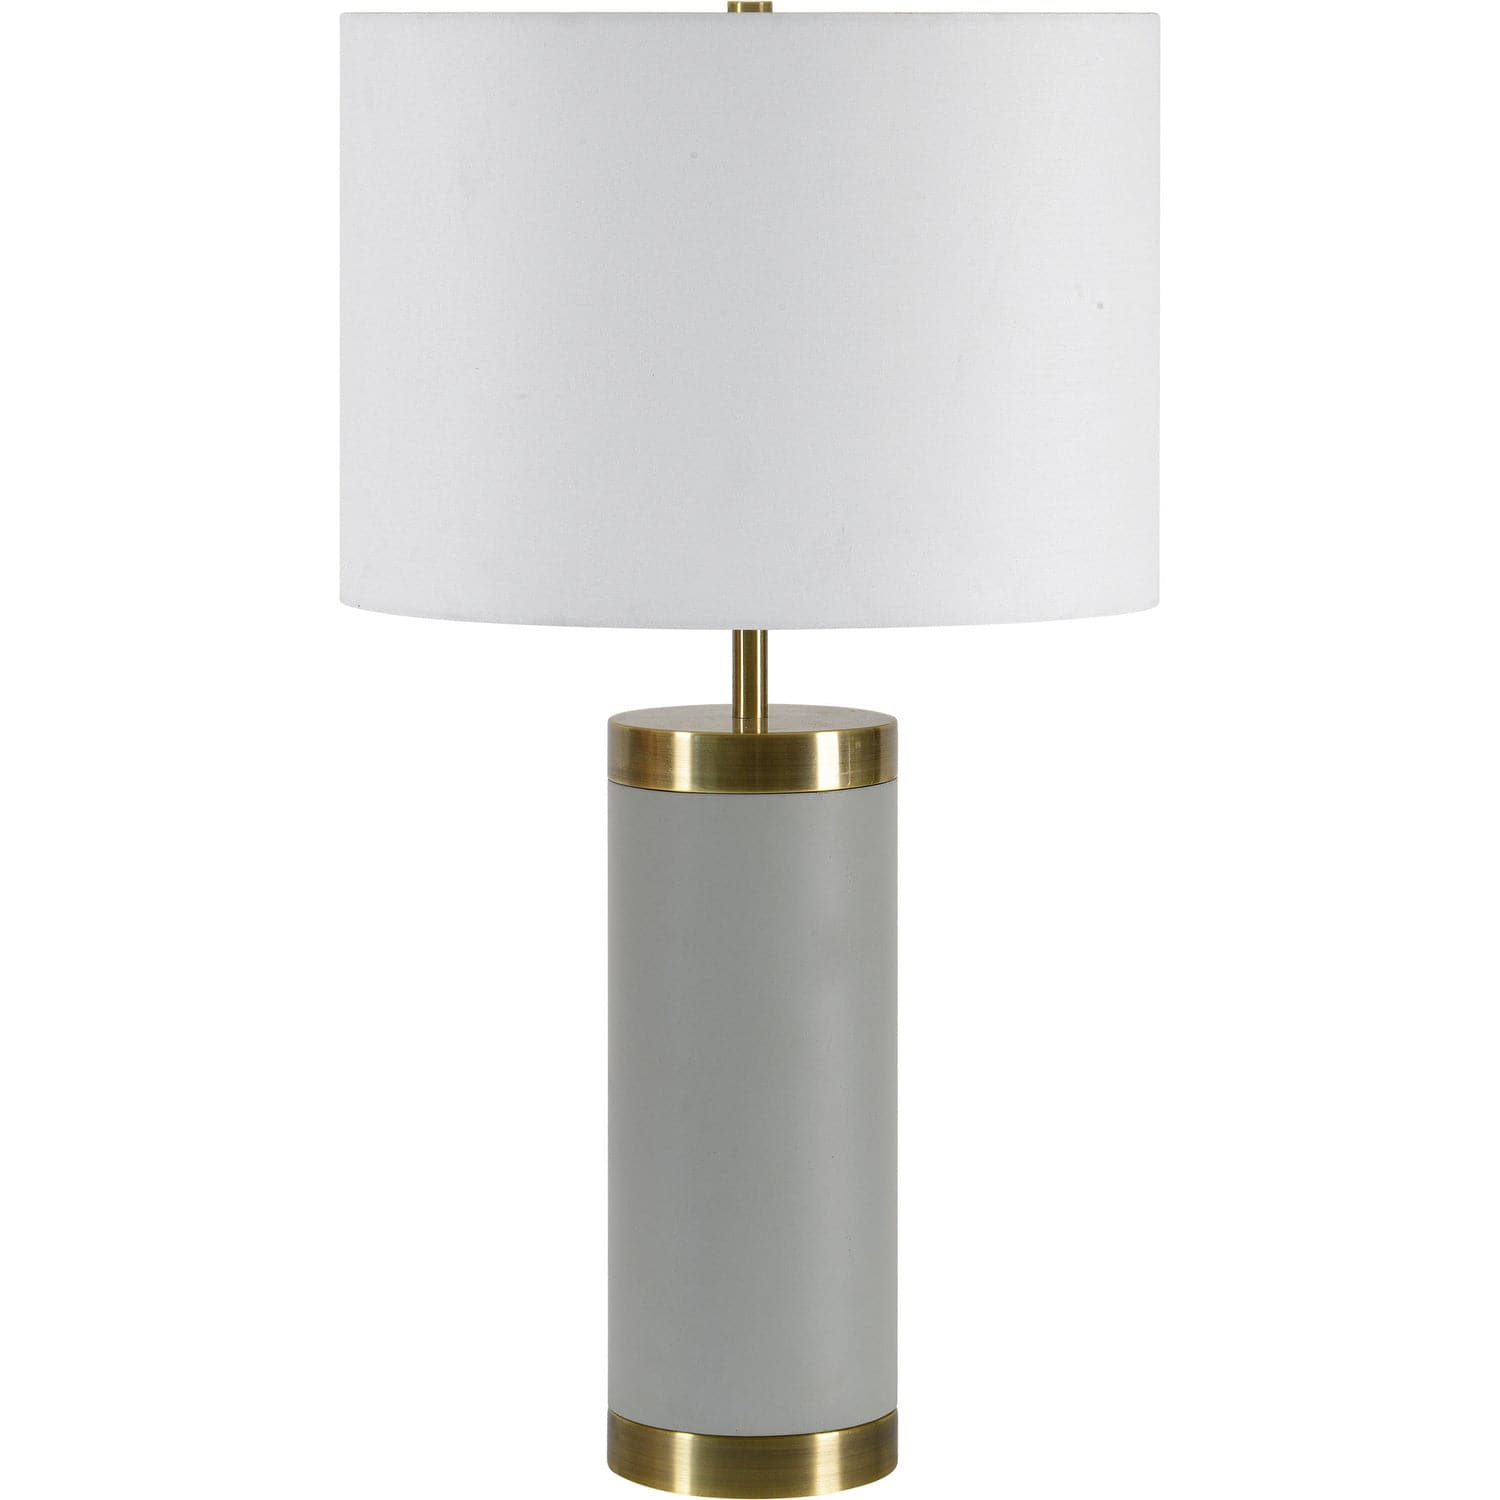 Renwil - LPT1174 - One Light Table Lamp - Kameron - Plated Antique Brushed Brass,Natural Light Grey